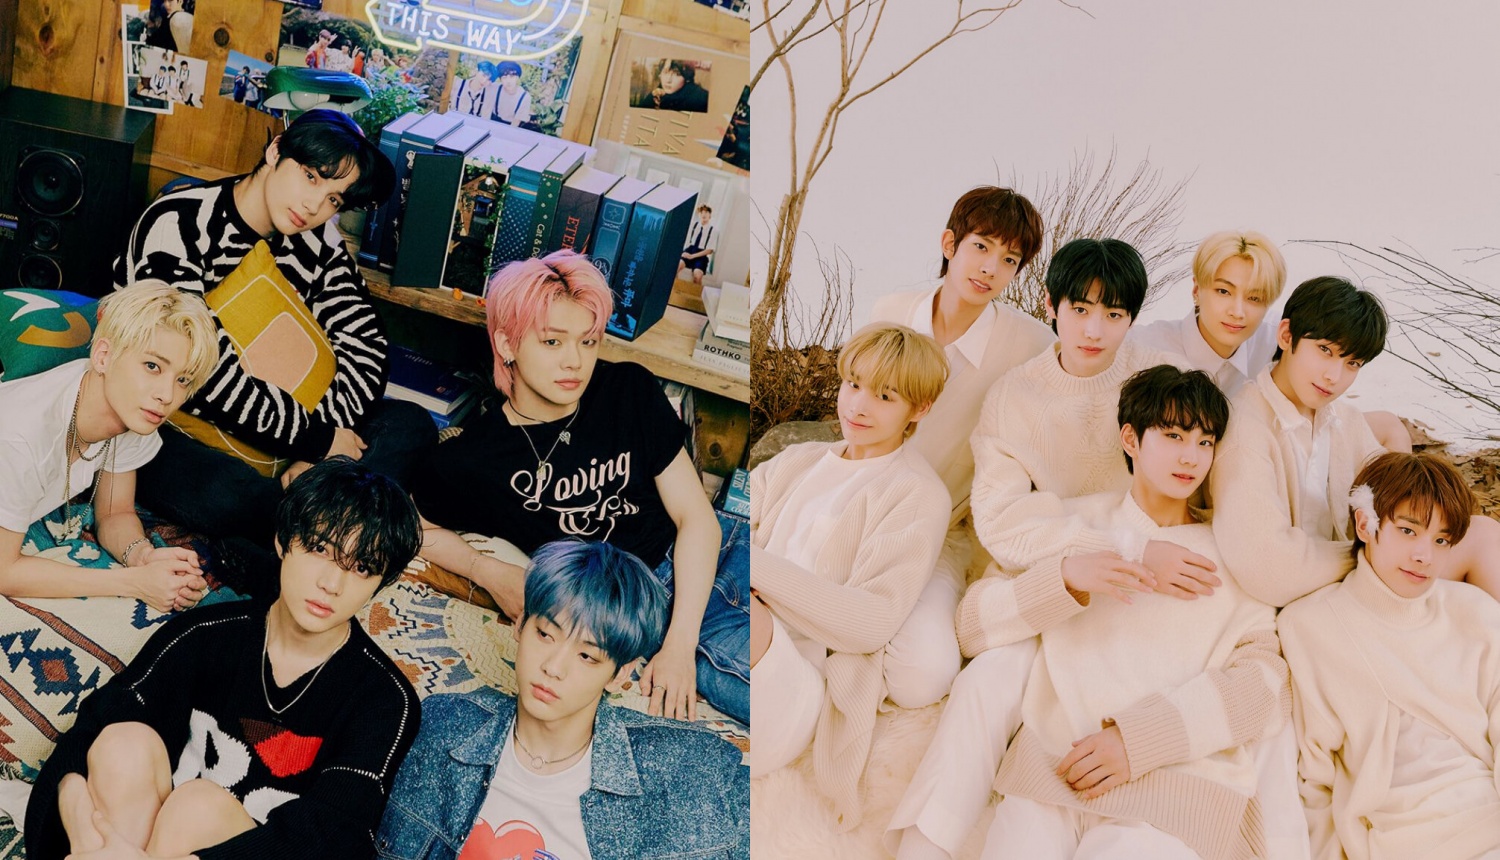 TXT and ENHYPEN to Appear Together in Their Own Lunar New Year Variety Show  - KpopHit - KPOP HIT